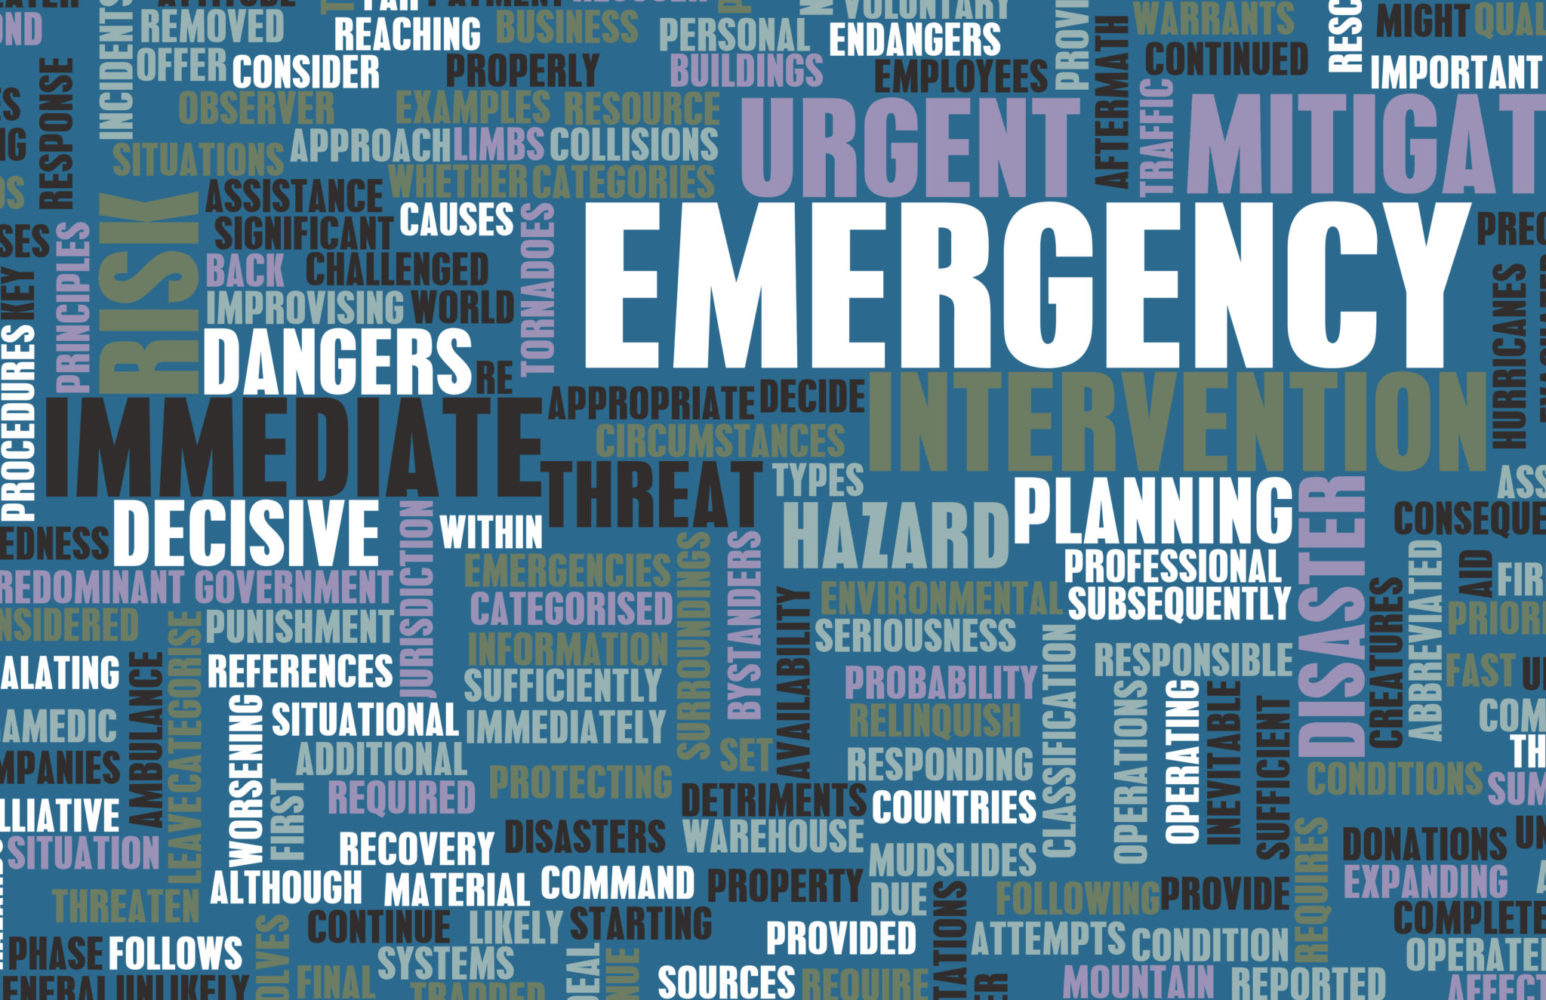 Business Continuity For Small Businesses